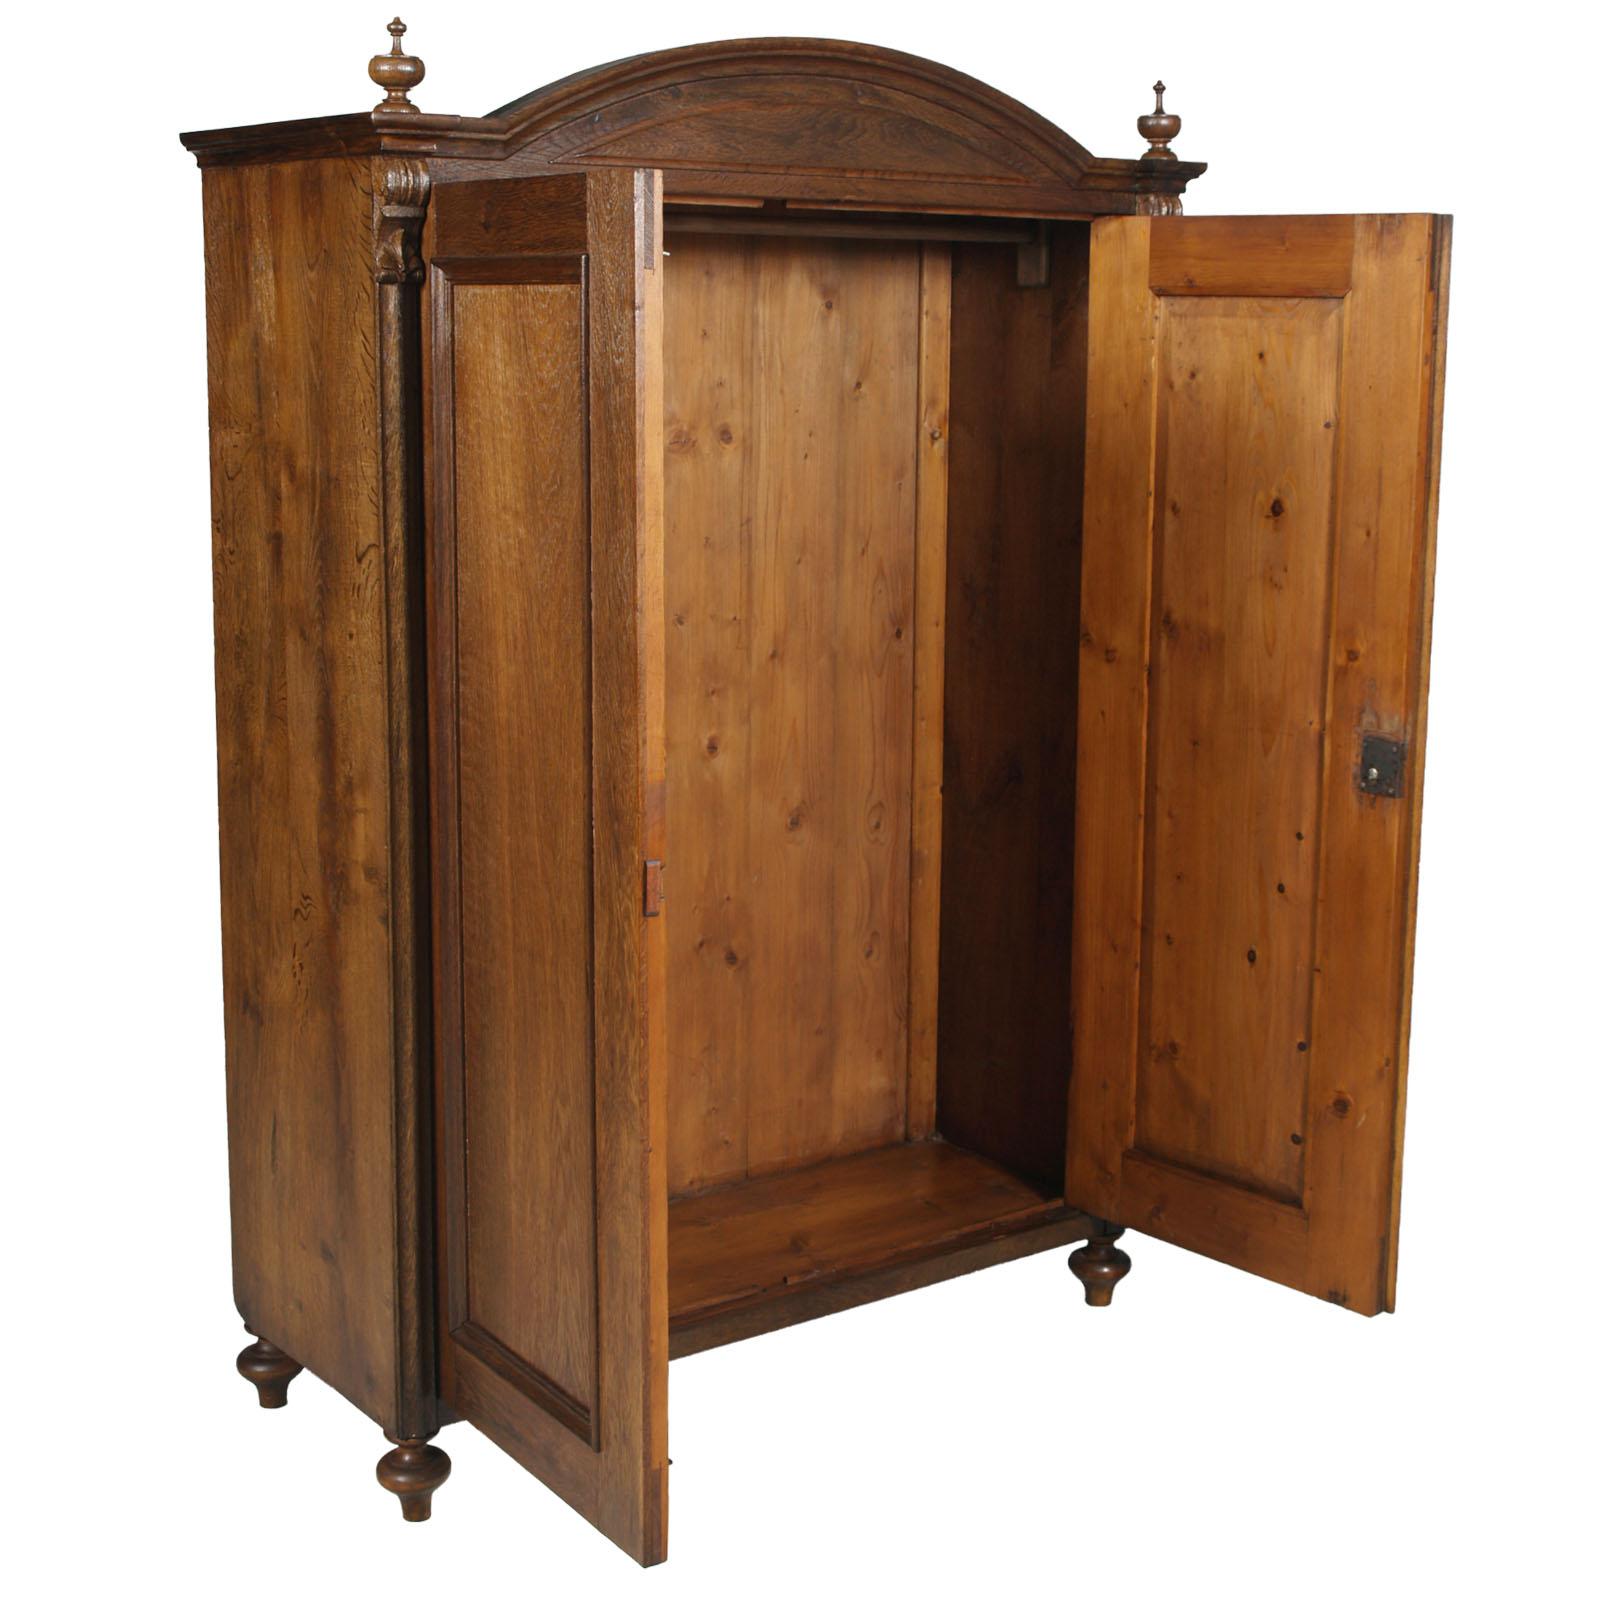 Robust neoclassical wardrobe From Vienna, mid-19th century, with a gendarme's hat, in solid oakwood, restored and waxed.
We can add internal shelves to use it as a wanderful bookcase

Measures cm: H 180, W 127, D 54.